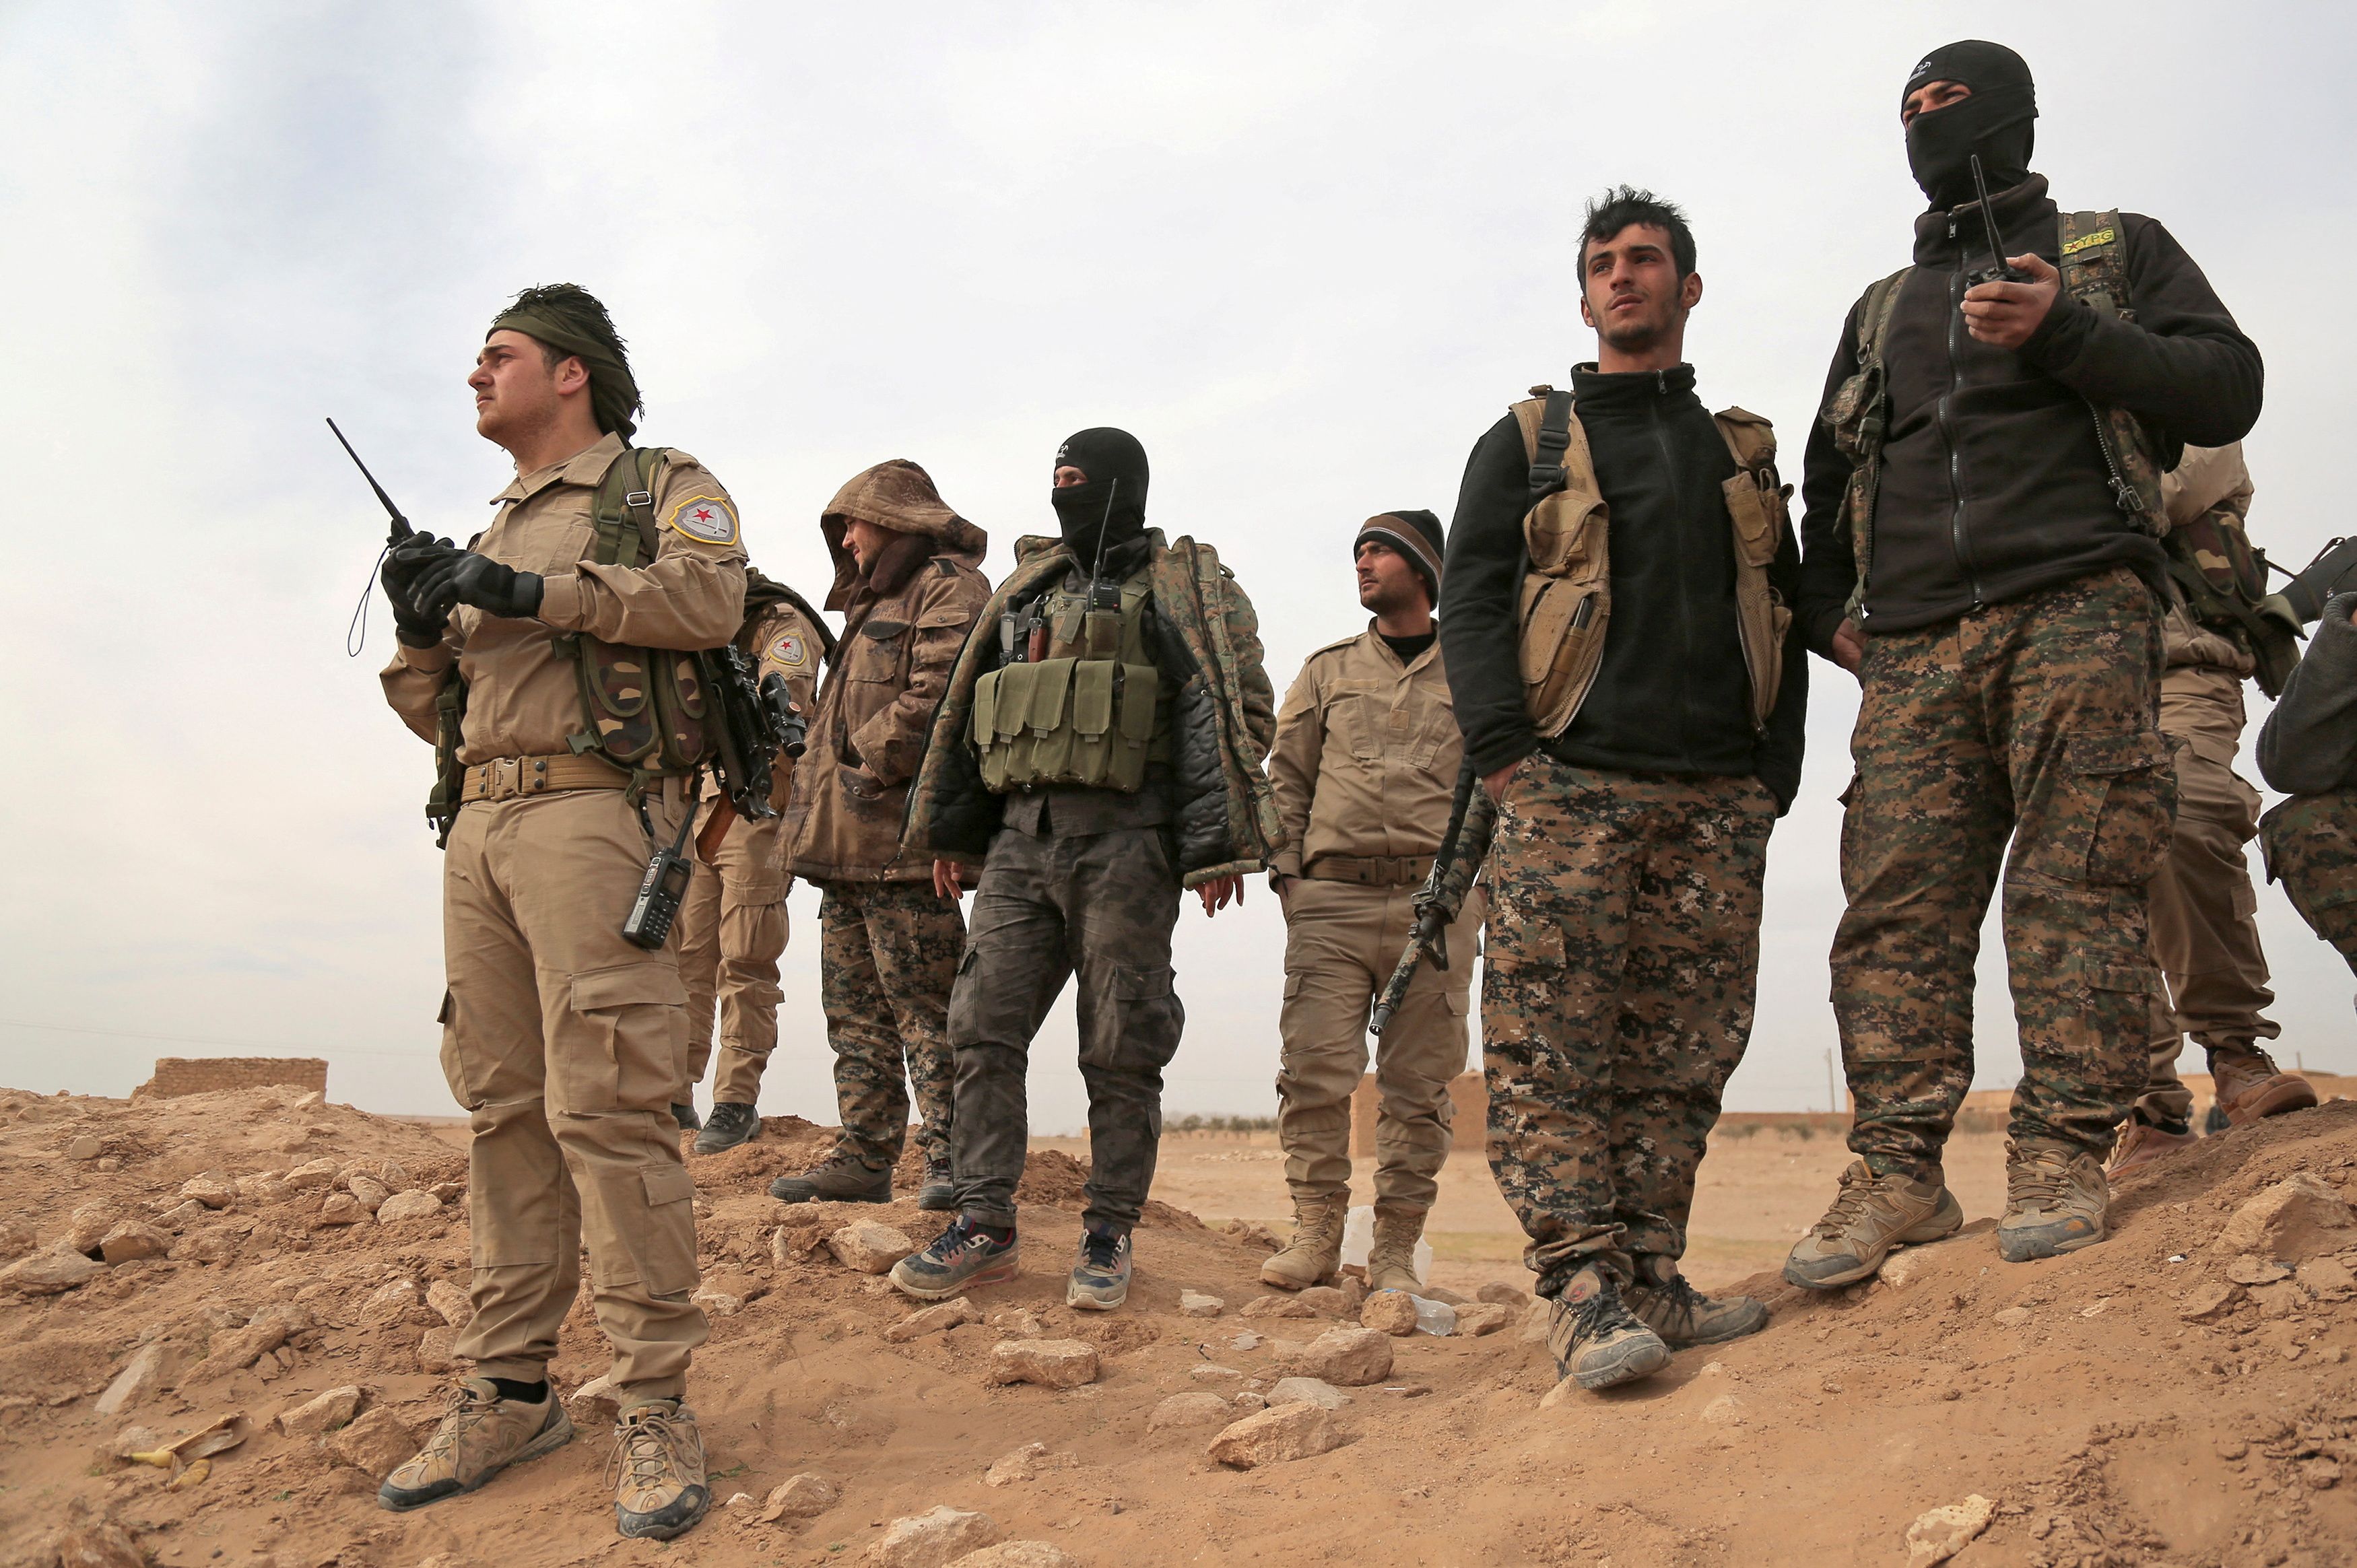 Syrian Democratic Forces (SDF) fighters gather during an offensive against Islamic State militants in northern Raqqa province